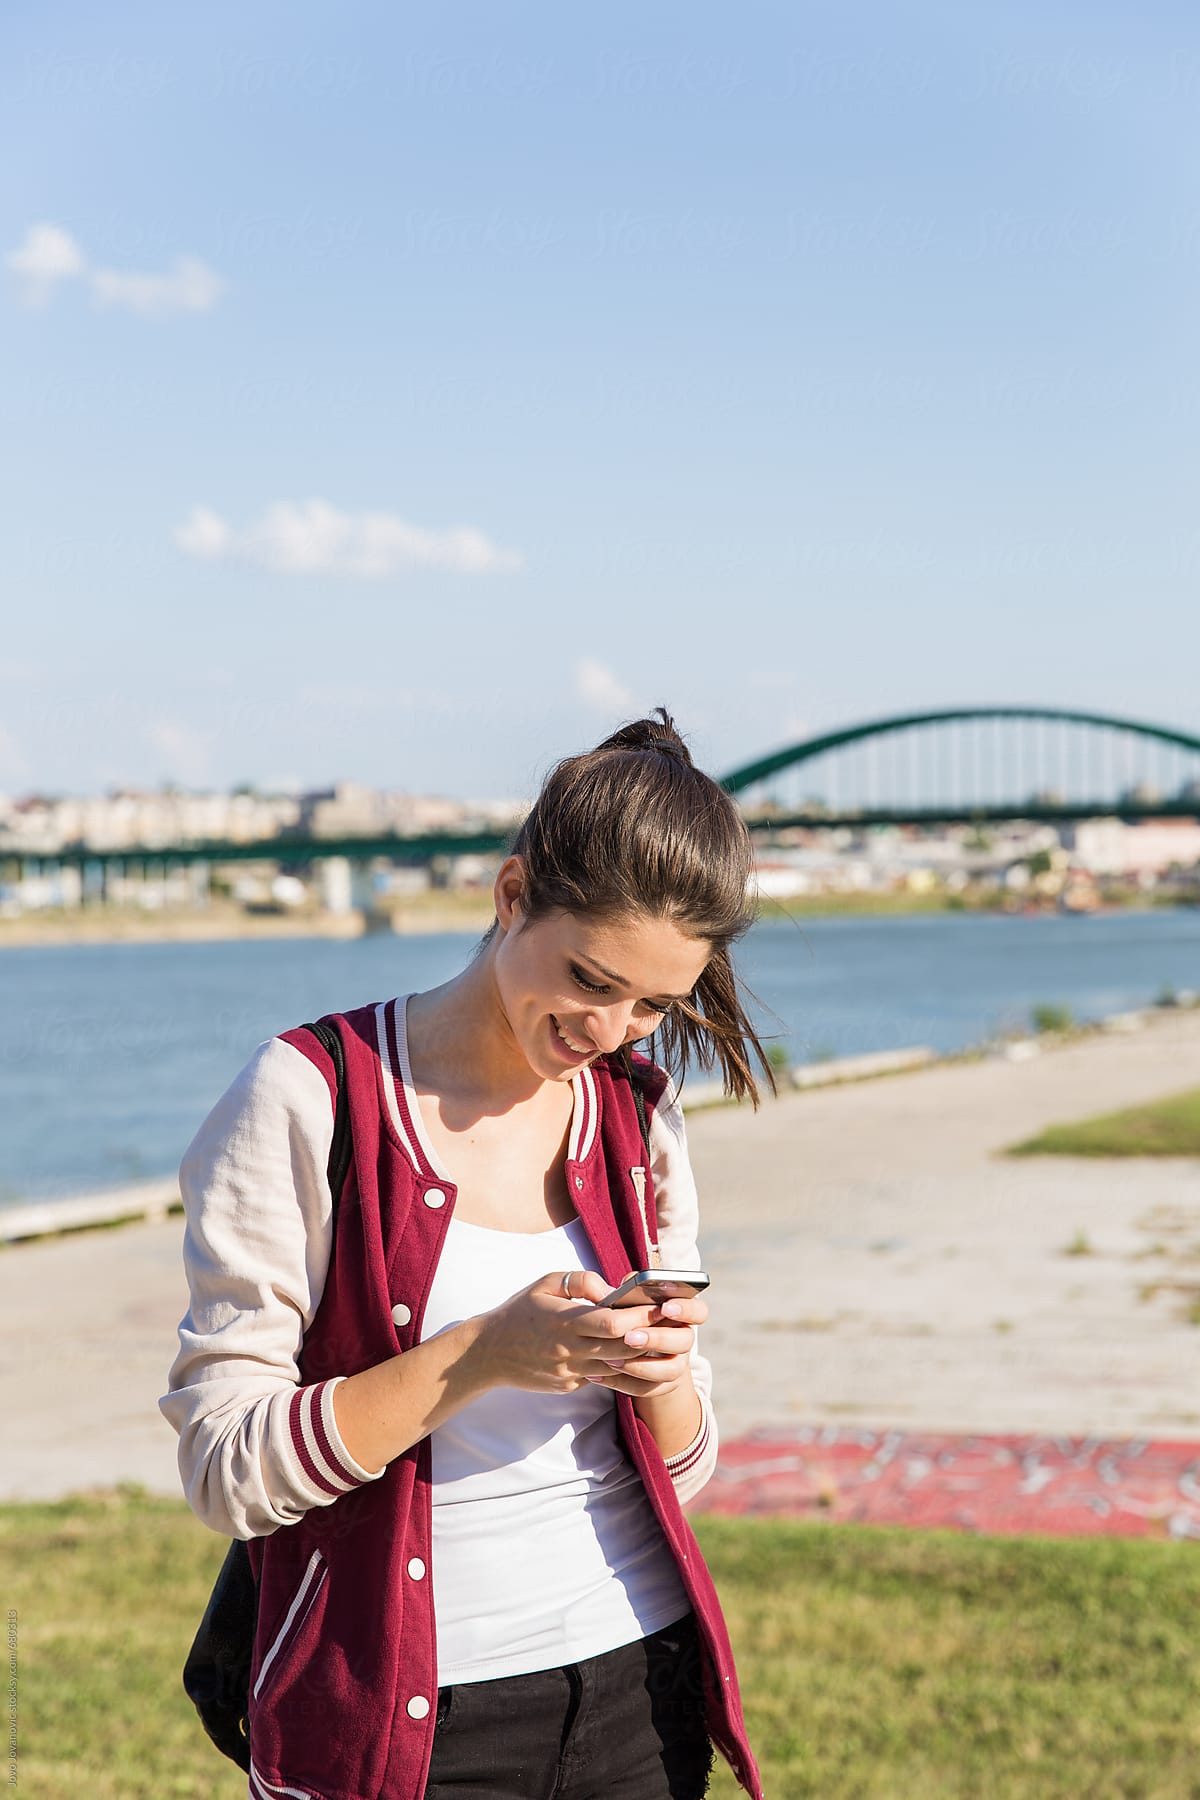 A Portrait Of A Smiling Beautiful Woman Texting With Her Phone By Stocksy Contributor Jovo